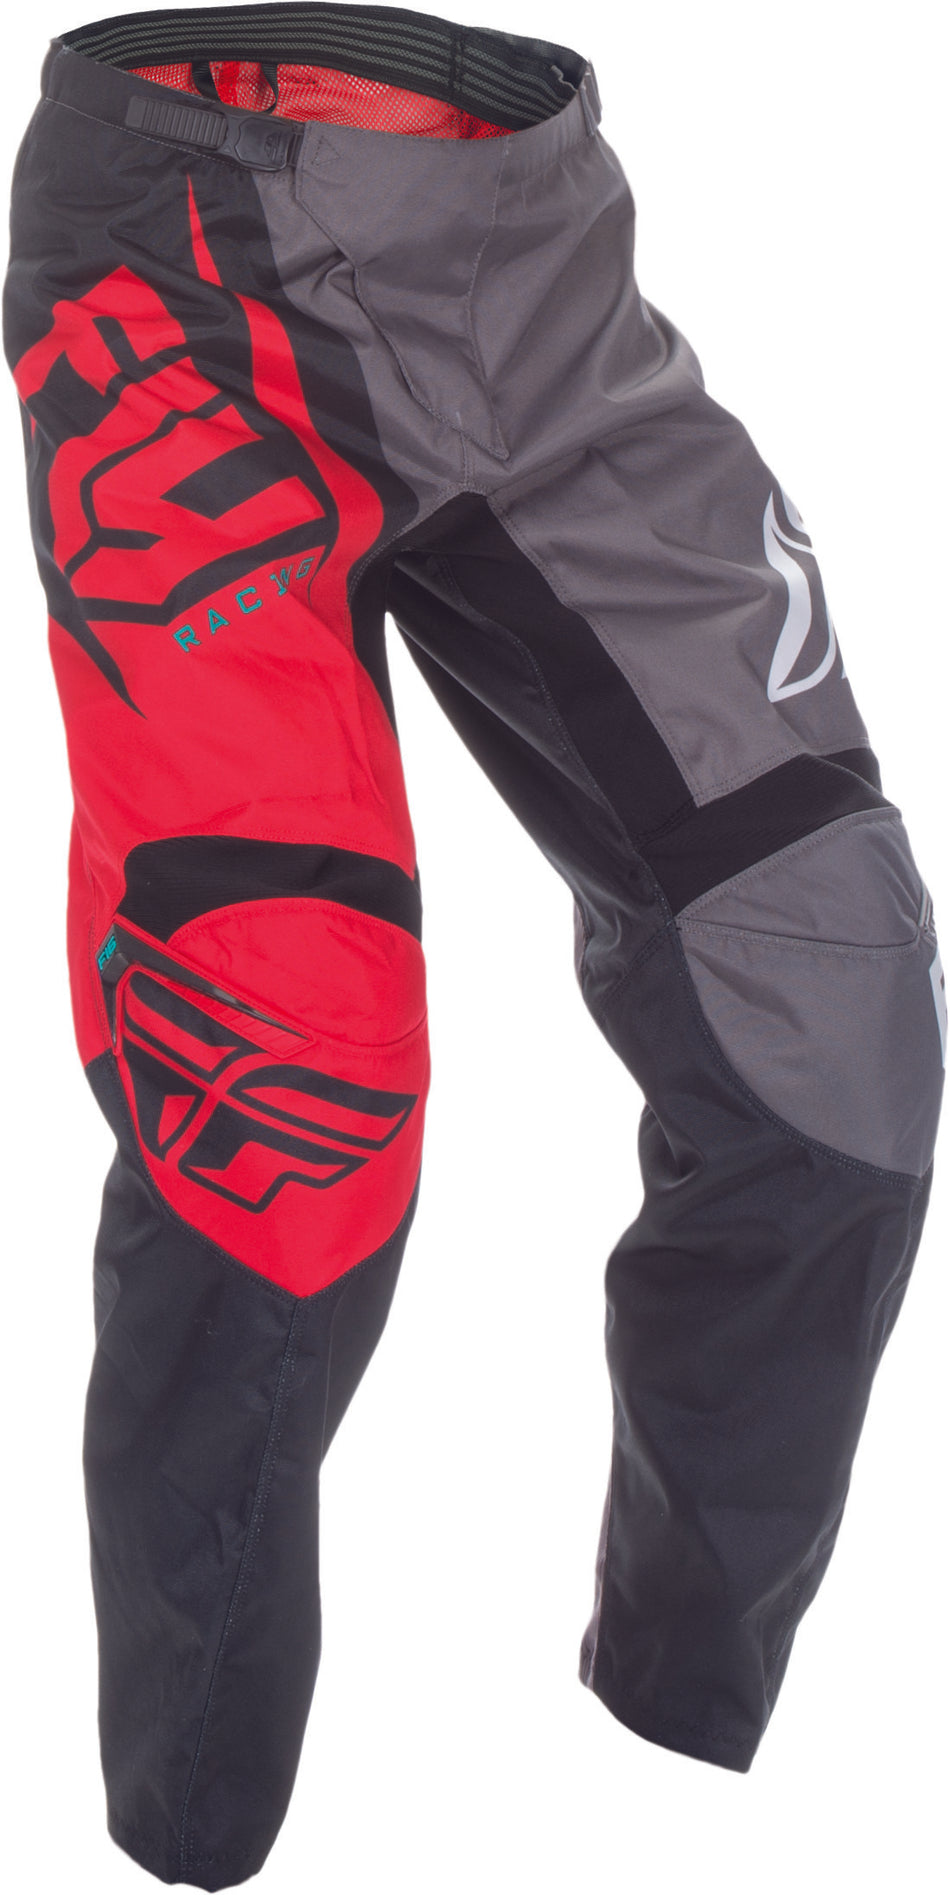 FLY RACING F-16 Pant Red/Black/Grey Sz 42 370-93242